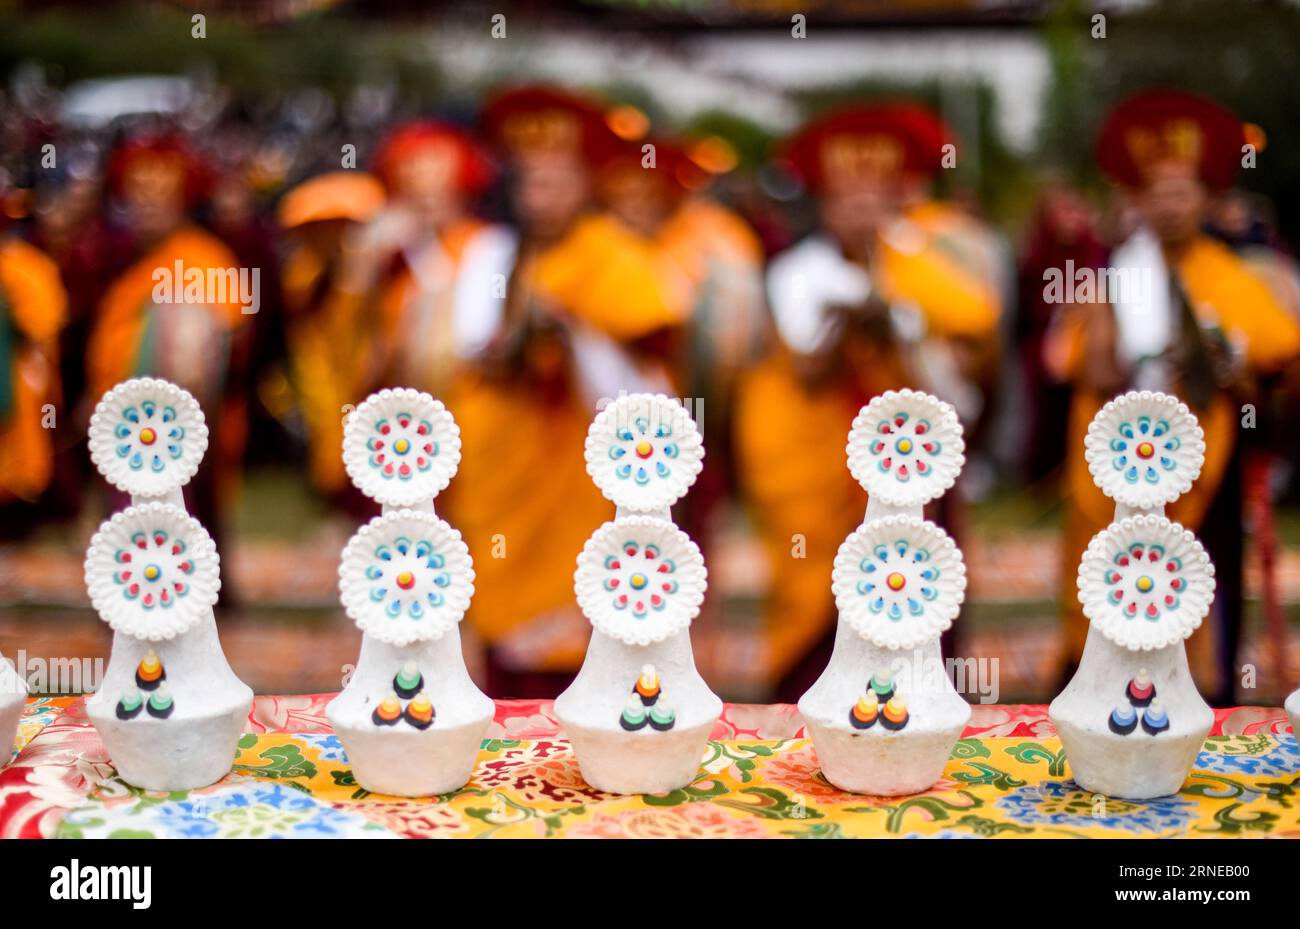 (160616) -- LHASA, June 16, 2016 -- Photo taken on June 16, 2016 shows Tibetan butter sculptures at a Thangka worship activity at the Tsurphu Monastery in Lhasa, capital of southwest China s Tibet Autonomous Region. An annual Thangka worship activity to show a 38-meter-by-35-meter Thangka was held at Tsurphu Monastery, a main base of the Kagyu school in Tibetan Buddhism, on Thursday, attracting many followers. The Thangka is a Tibetan Buddhist scroll-banner painting. ) (wjq) CHINA-TIBET-THANGKA-WORSHIP (CN) PurbuxZhaxi PUBLICATIONxNOTxINxCHN   160616 Lhasa June 16 2016 Photo Taken ON June 16 2 Stock Photo